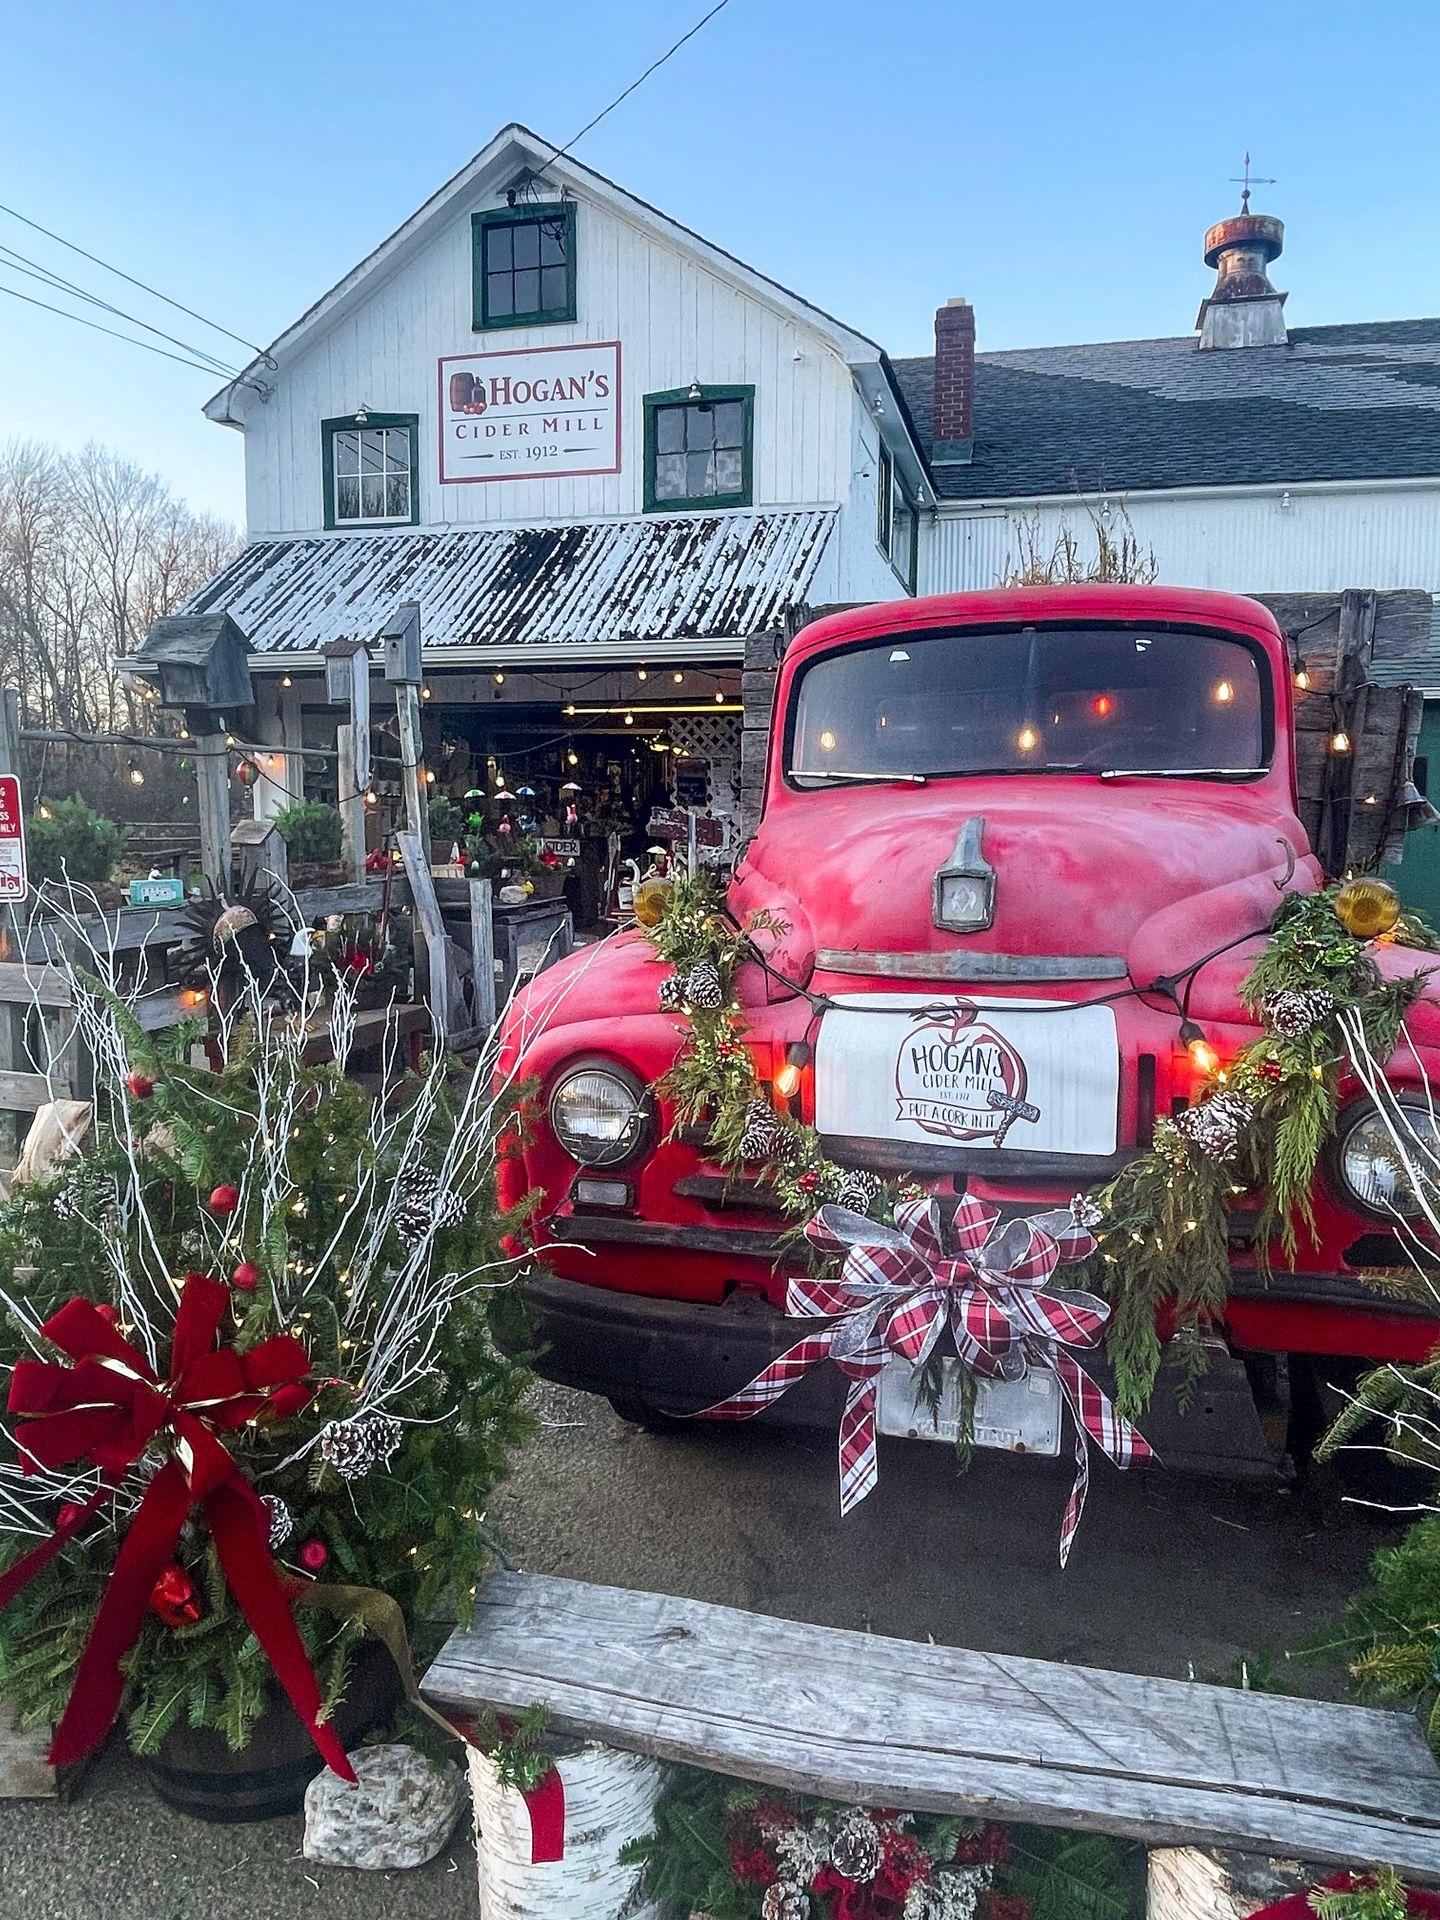 The exterior of Hogan's Cider Mill. There is a vintage red truck adorned with garland and a red bow. The general store in the background is white.